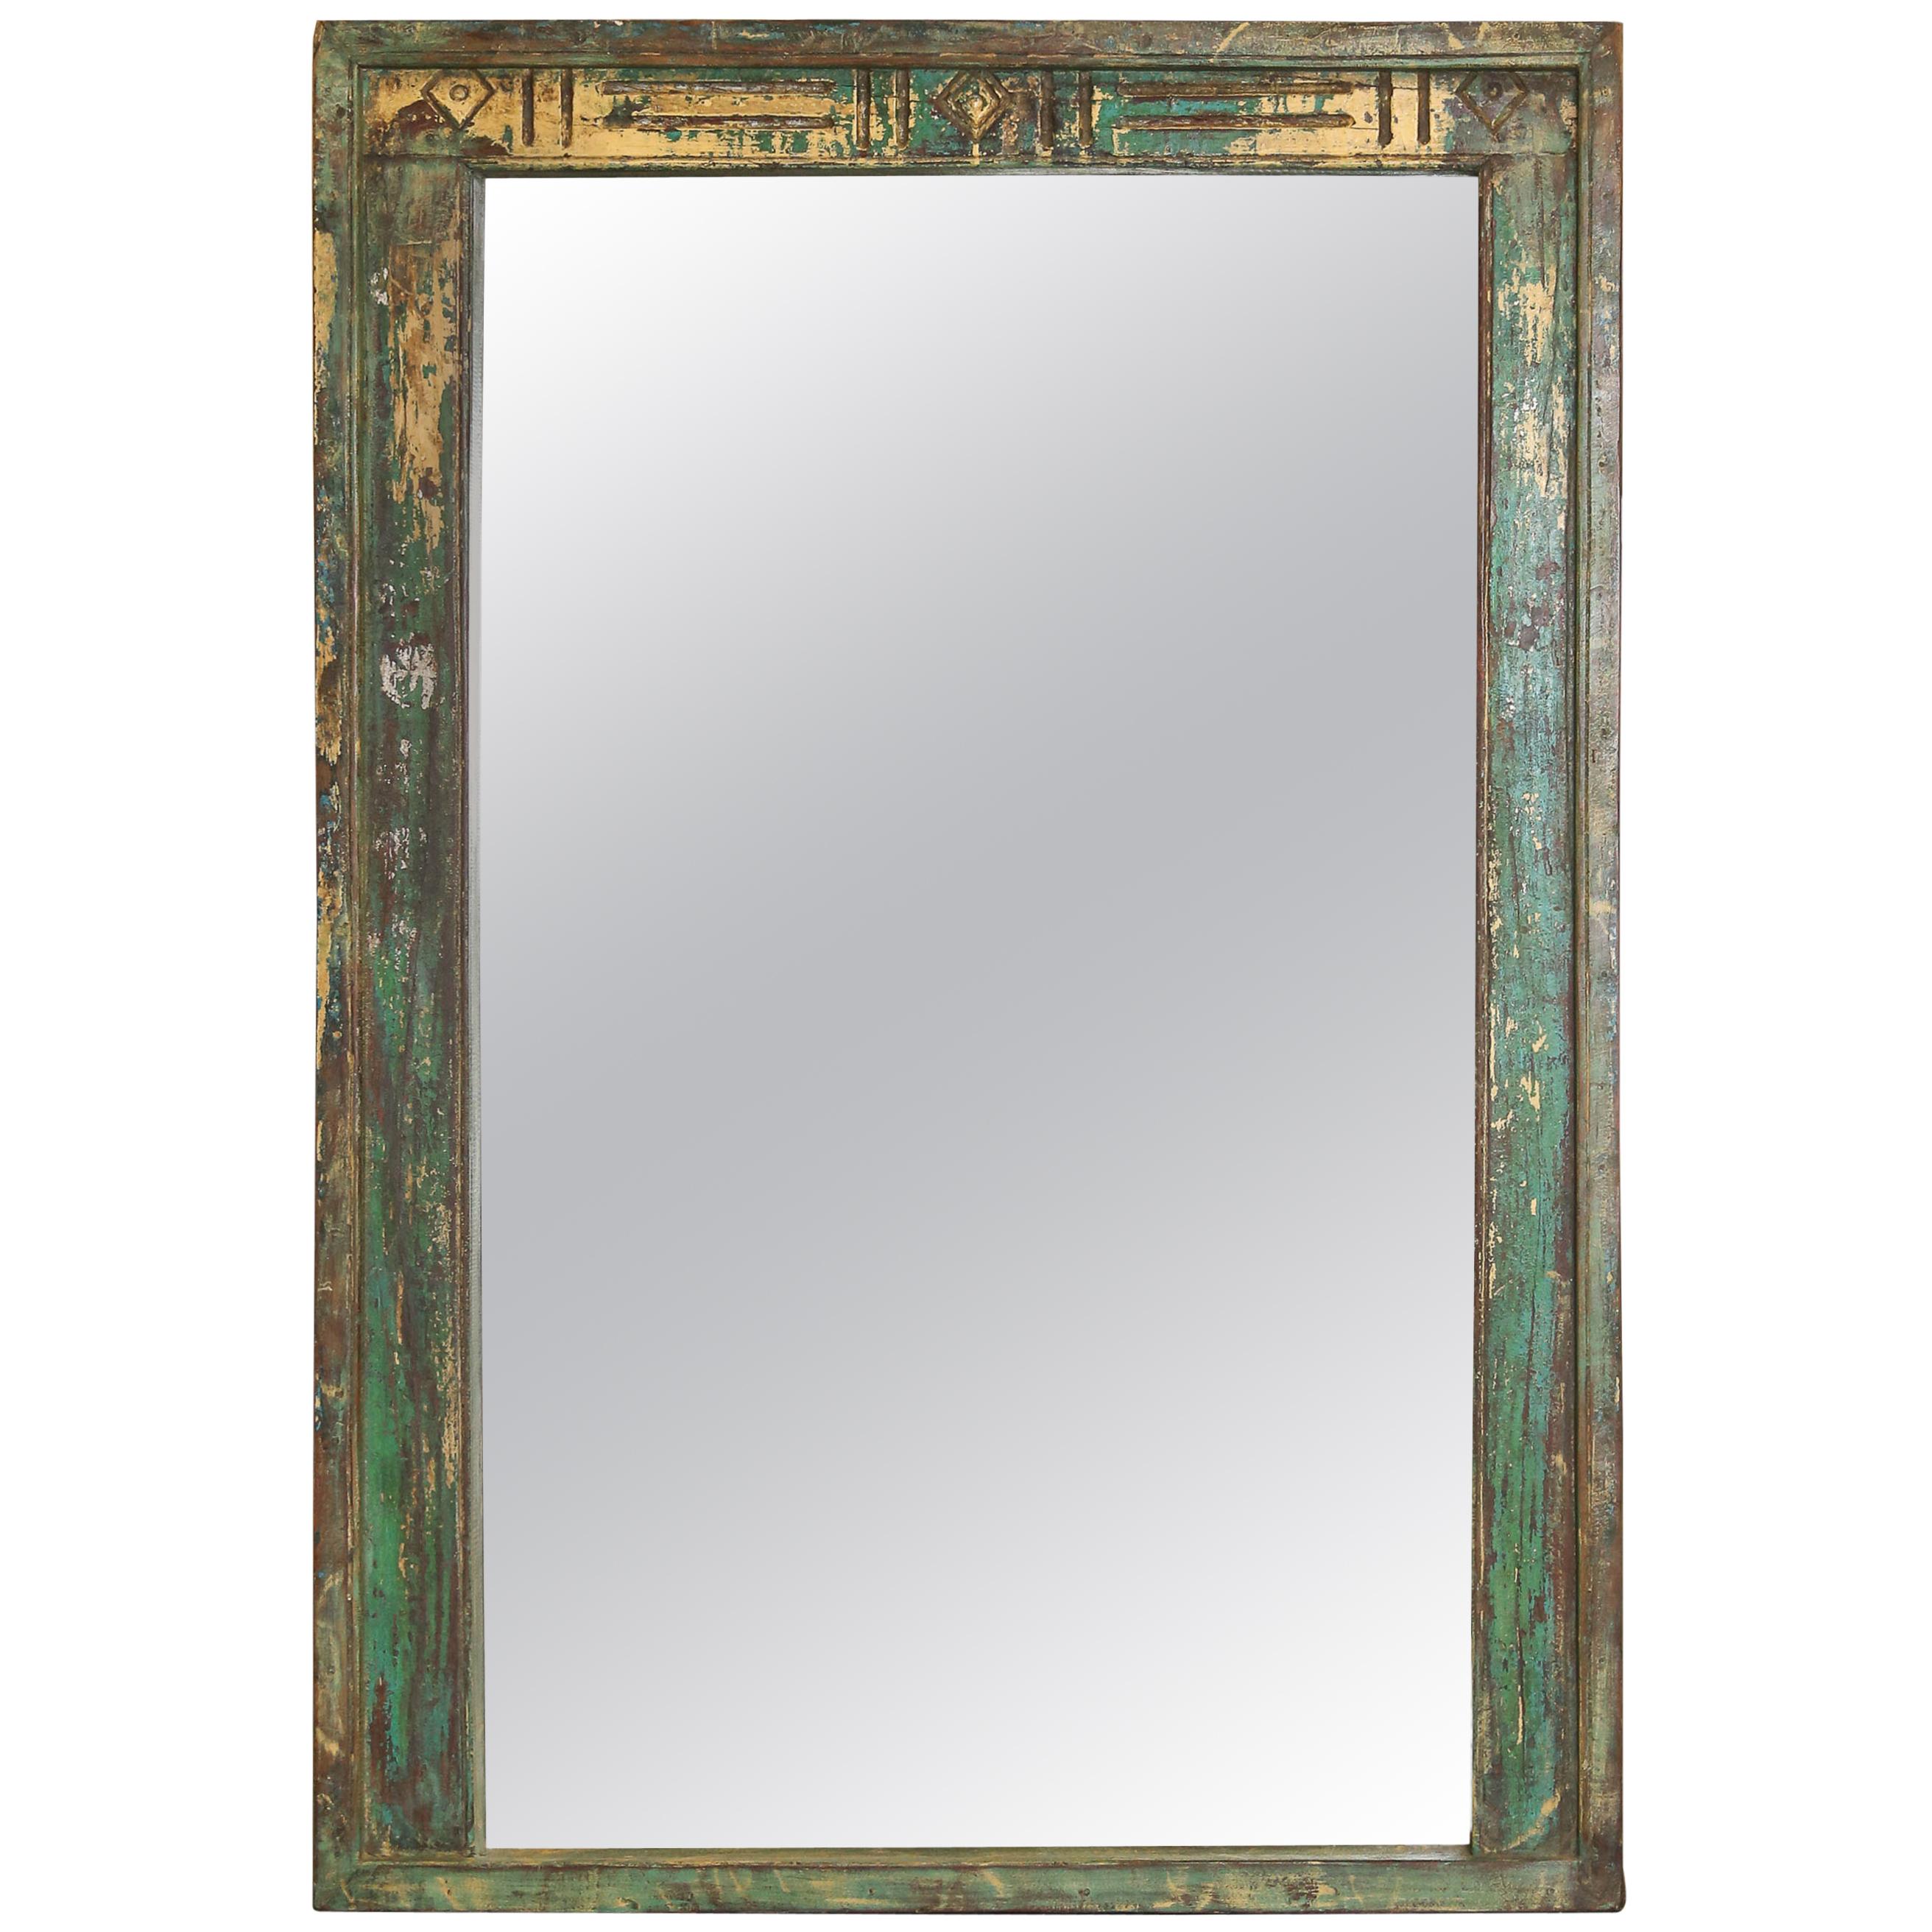 Elegant Frame for This Mirror Comes from a Mid-19th Century Mansion in Deccan